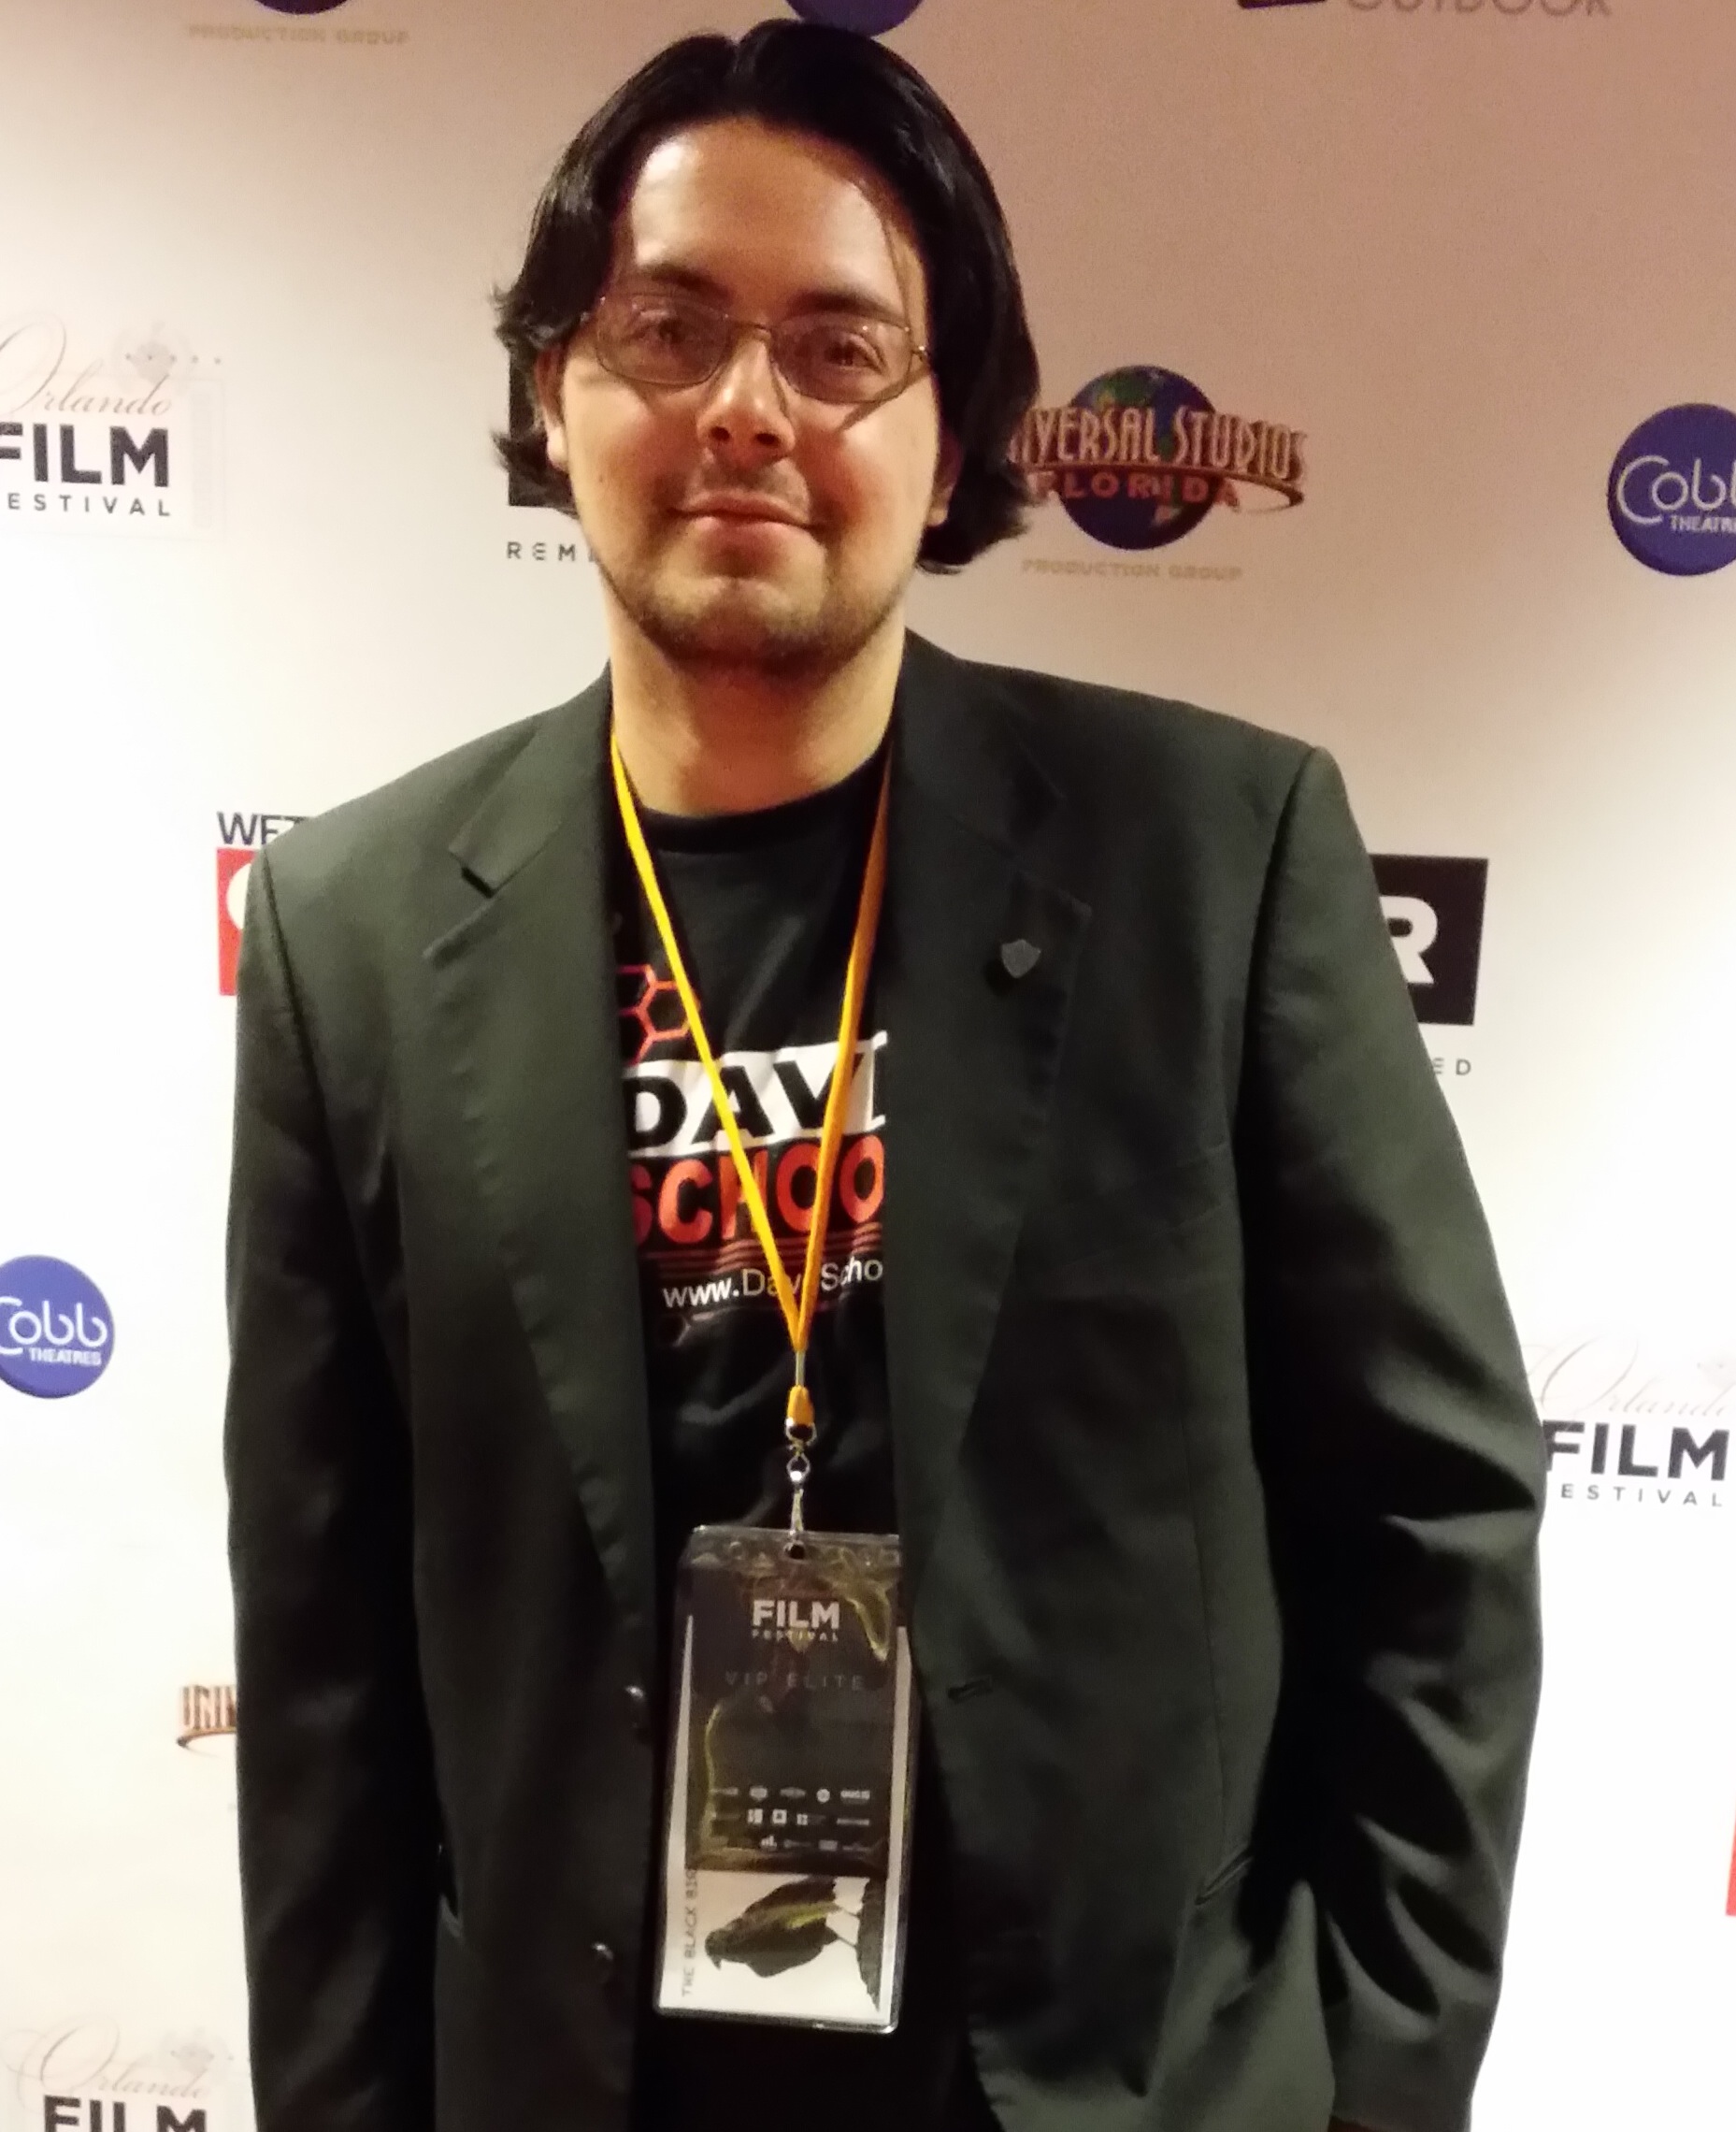 Jared Cooley at the Orlando Film Festival 2013 for the premiere of The Black Bird